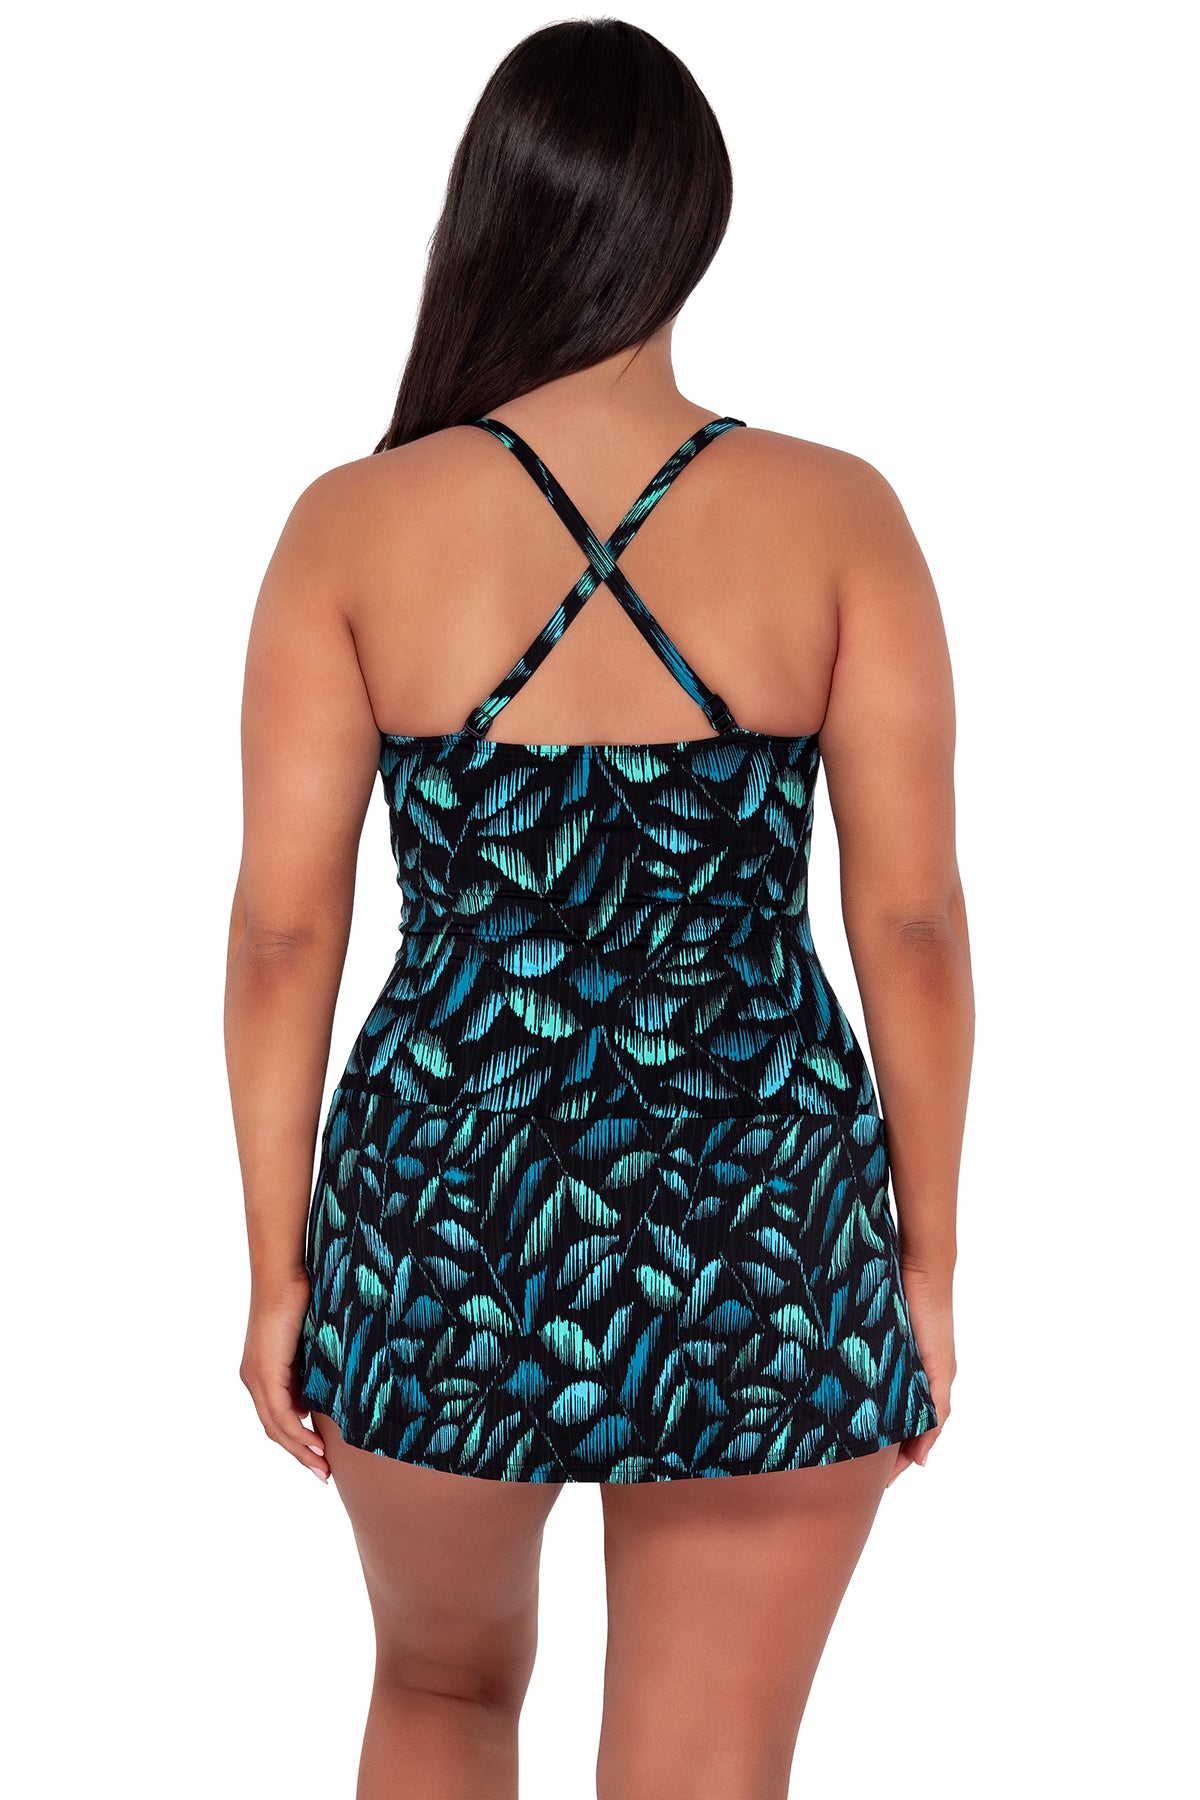 Back pose #1 of Nicki wearing Sunsets Escape Cascade Seagrass Texture Sienna Swim Dress showing crossback straps